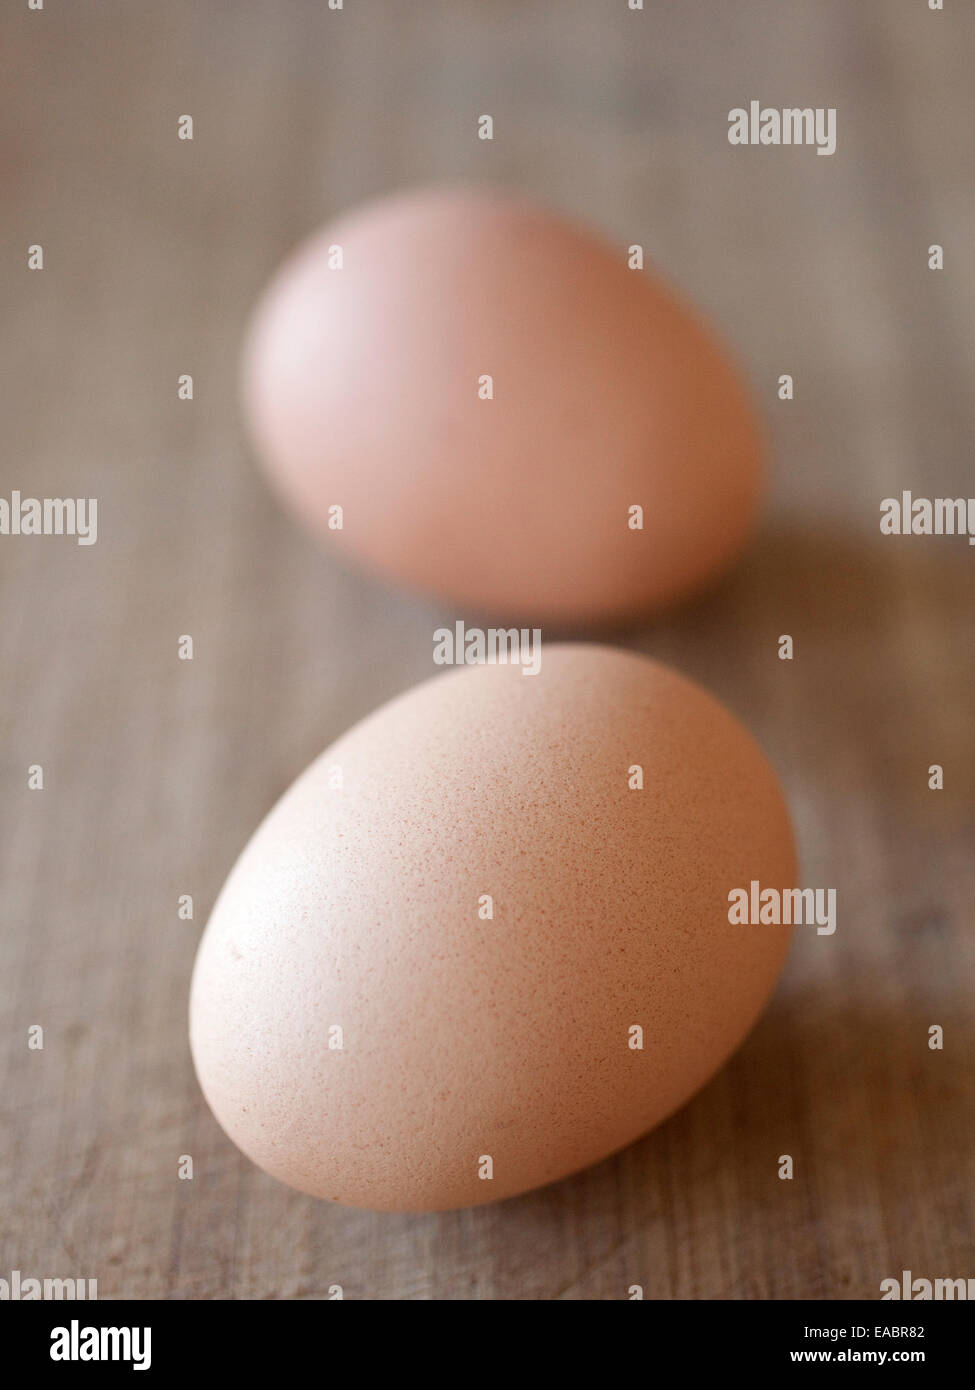 Two brown eggs on a wood surface. Stock Photo